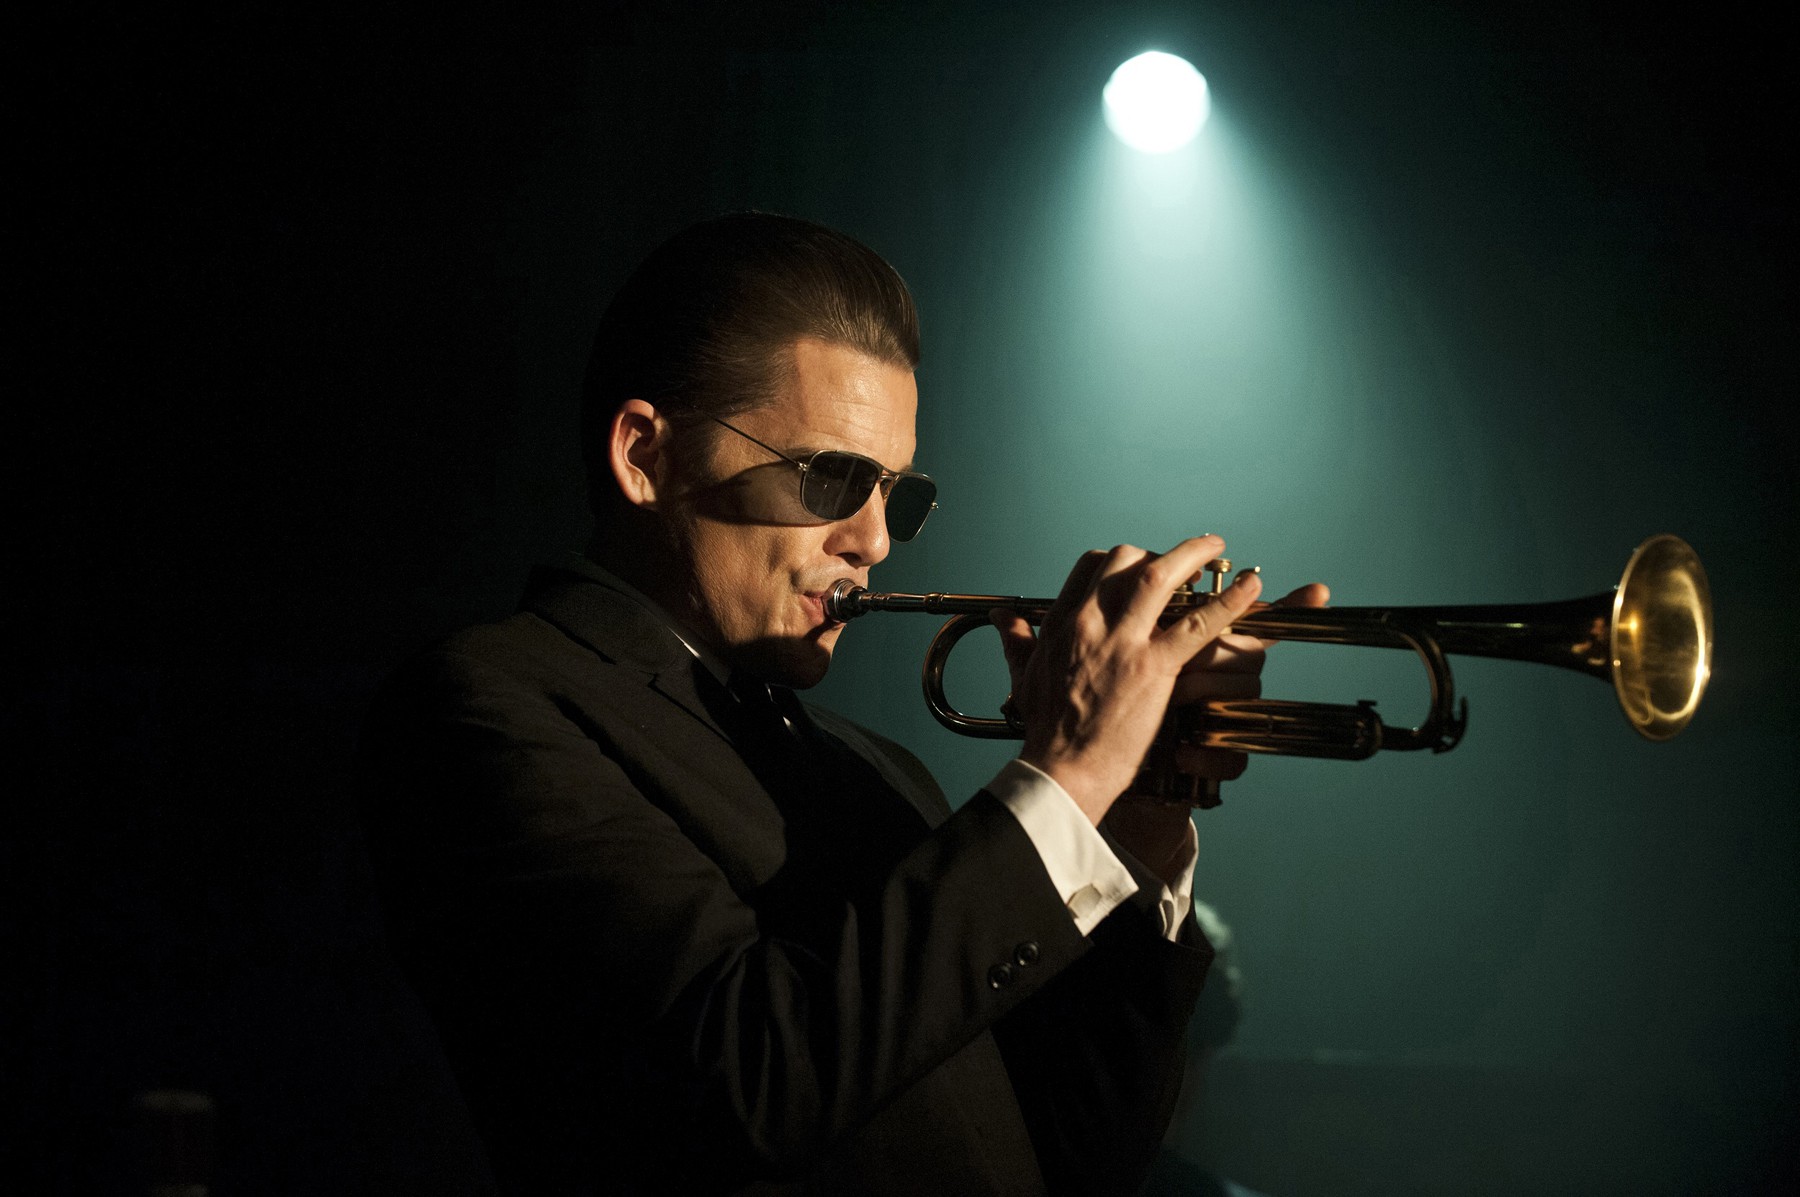 Ethan Hawke portrays Chet Baker in 'Born to Be Blue'